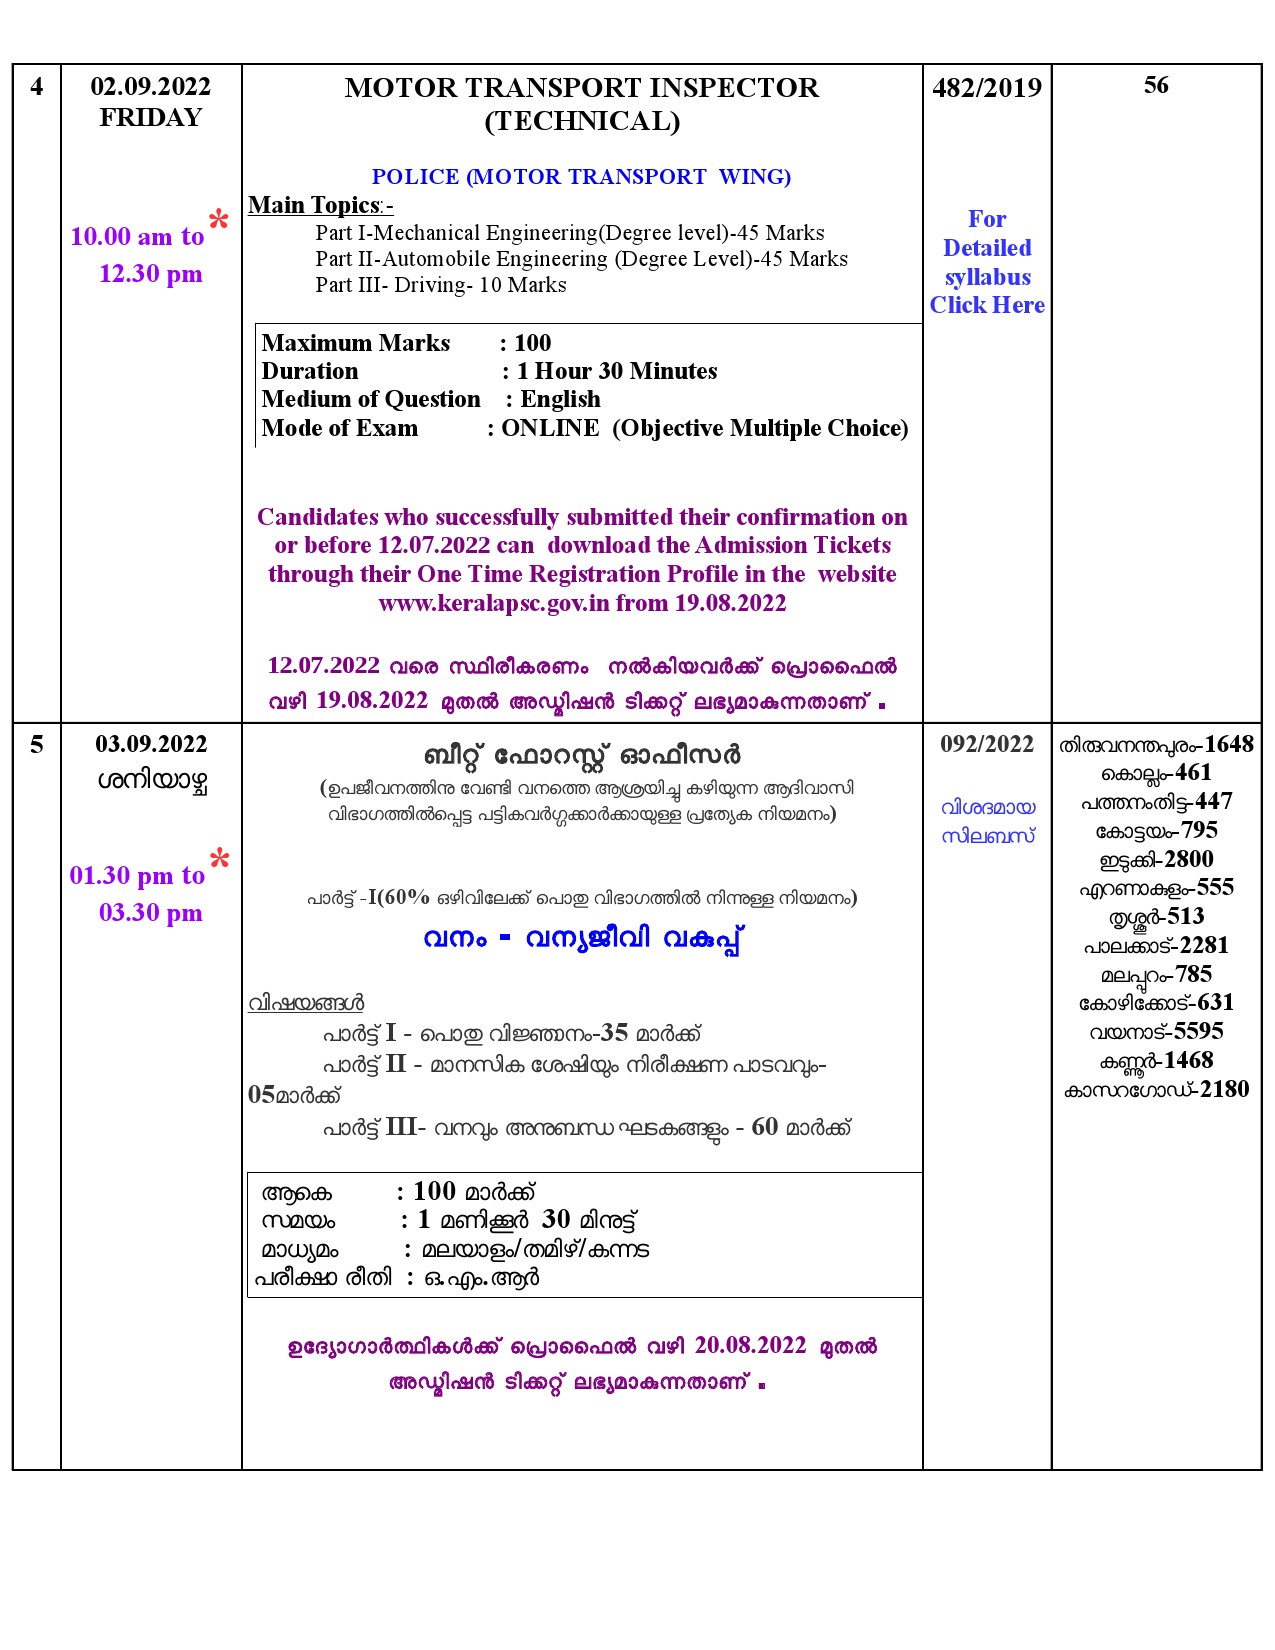 KPSC Modified Exam For The Month Of September 2022 - Notification Image 3